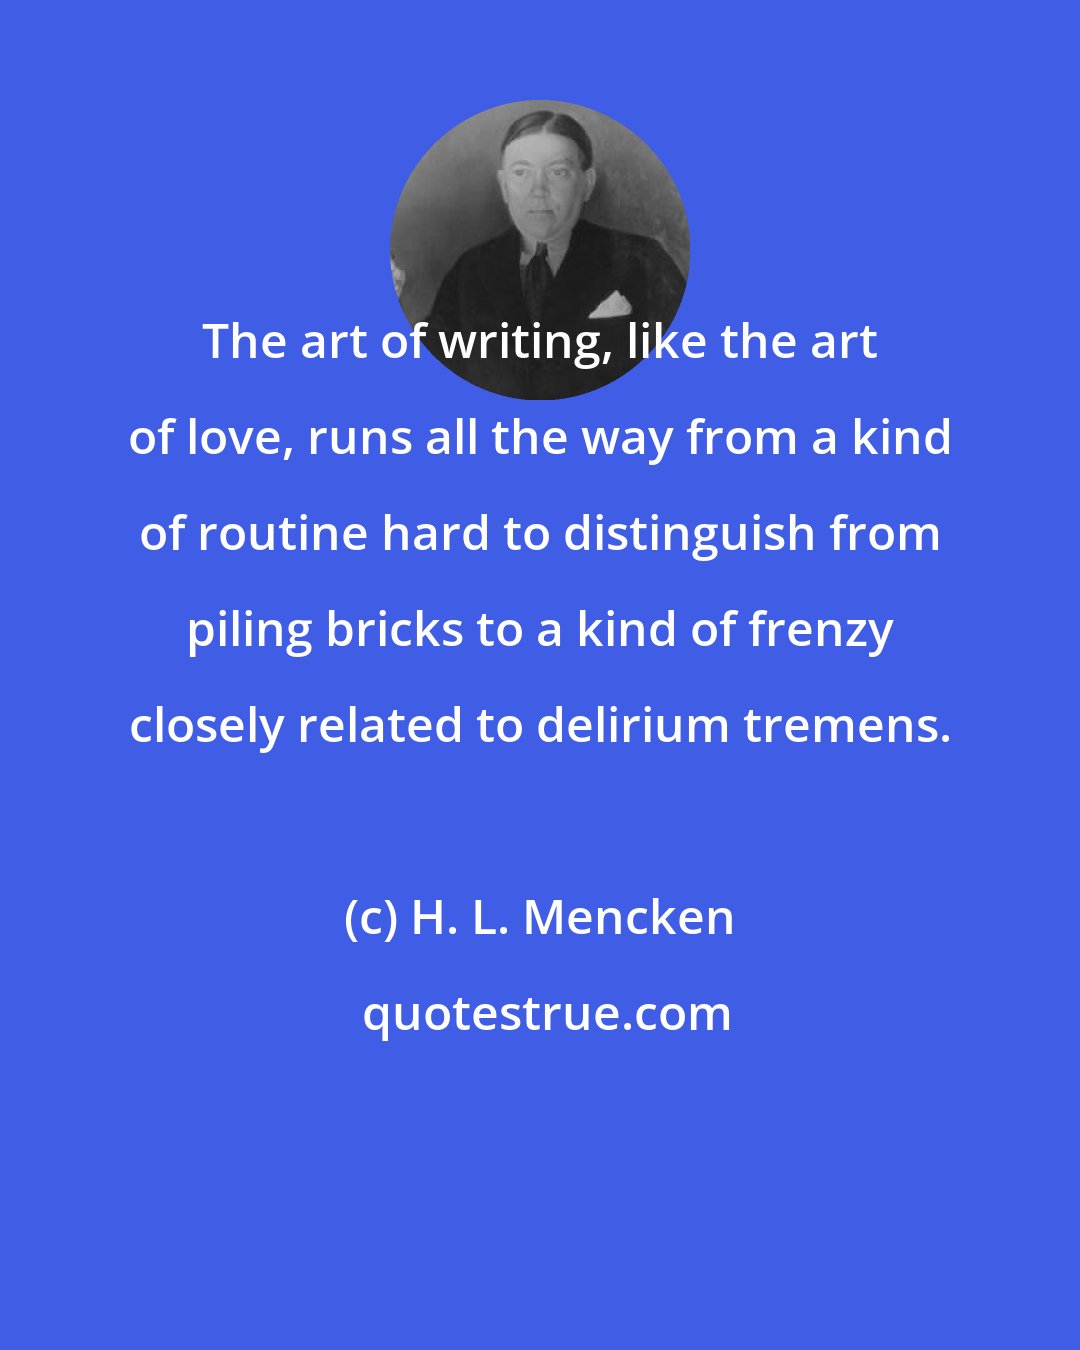 H. L. Mencken: The art of writing, like the art of love, runs all the way from a kind of routine hard to distinguish from piling bricks to a kind of frenzy closely related to delirium tremens.